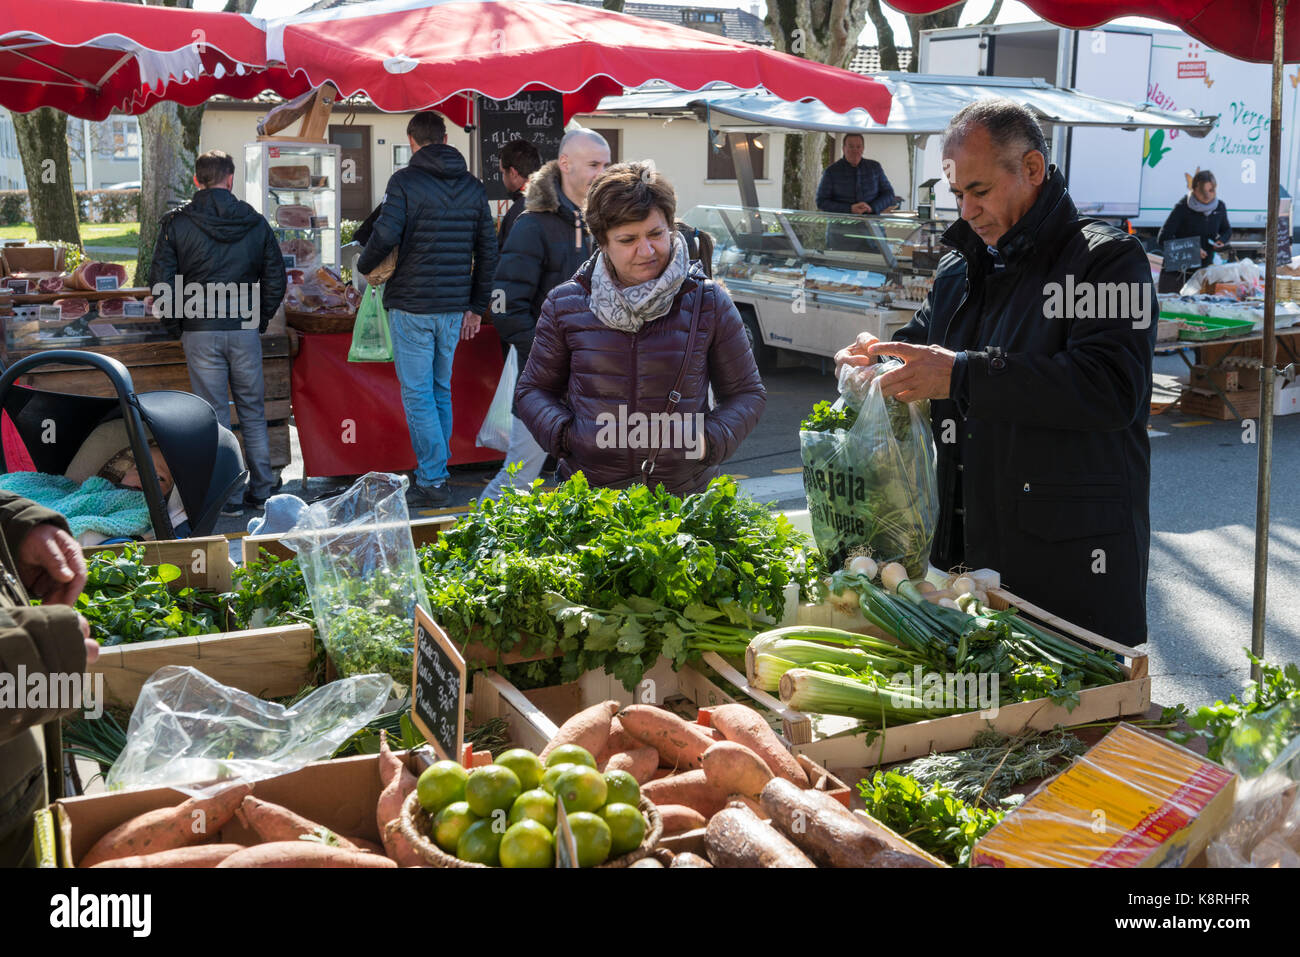 Woman buys vegetables, market in Ferney Voltaire, Ain Rhone-Alpes, France Stock Photo